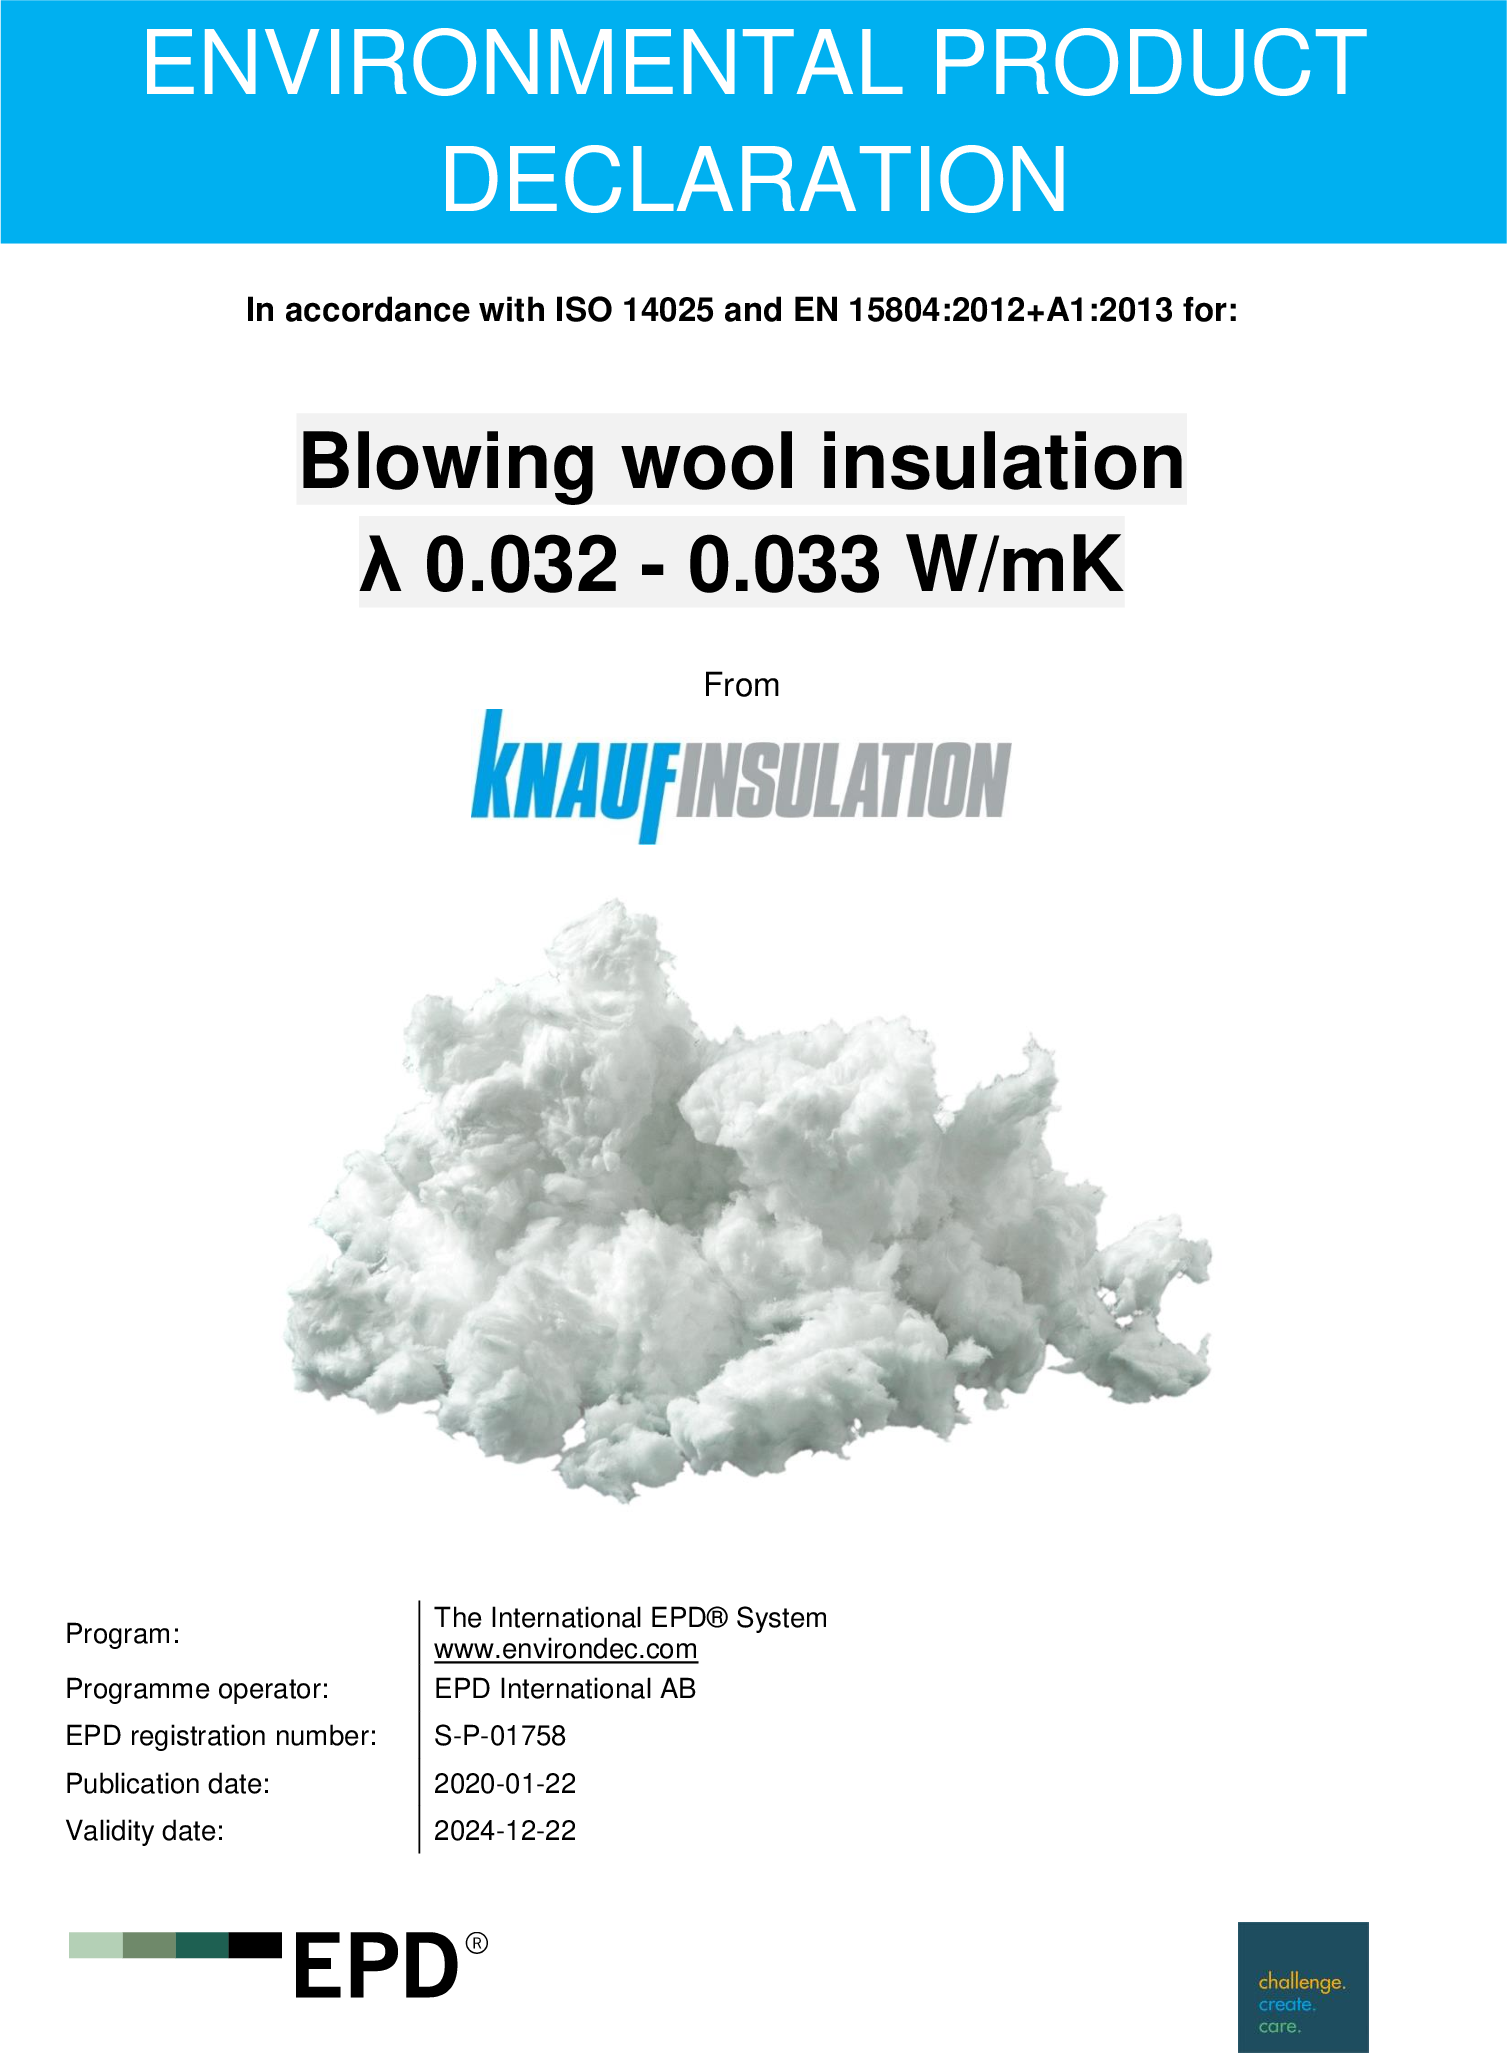 Blowing Wool Insulation 0.032-0.033